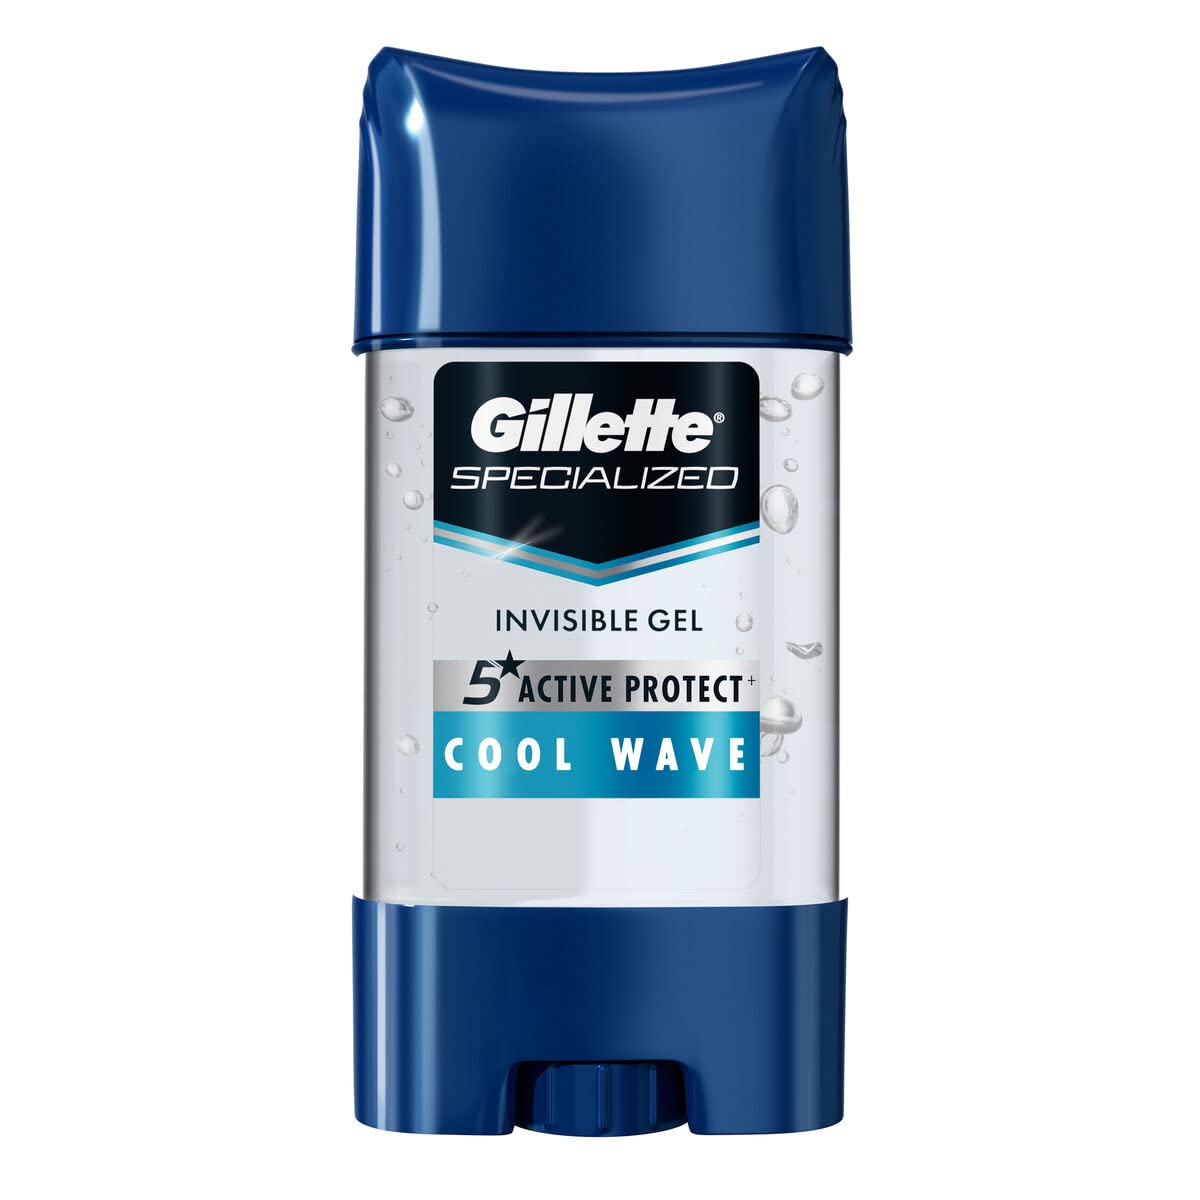 Gillette Anti-Perspirant Deodorant Clear Gel, Cool Wave, 3.8 Ounce